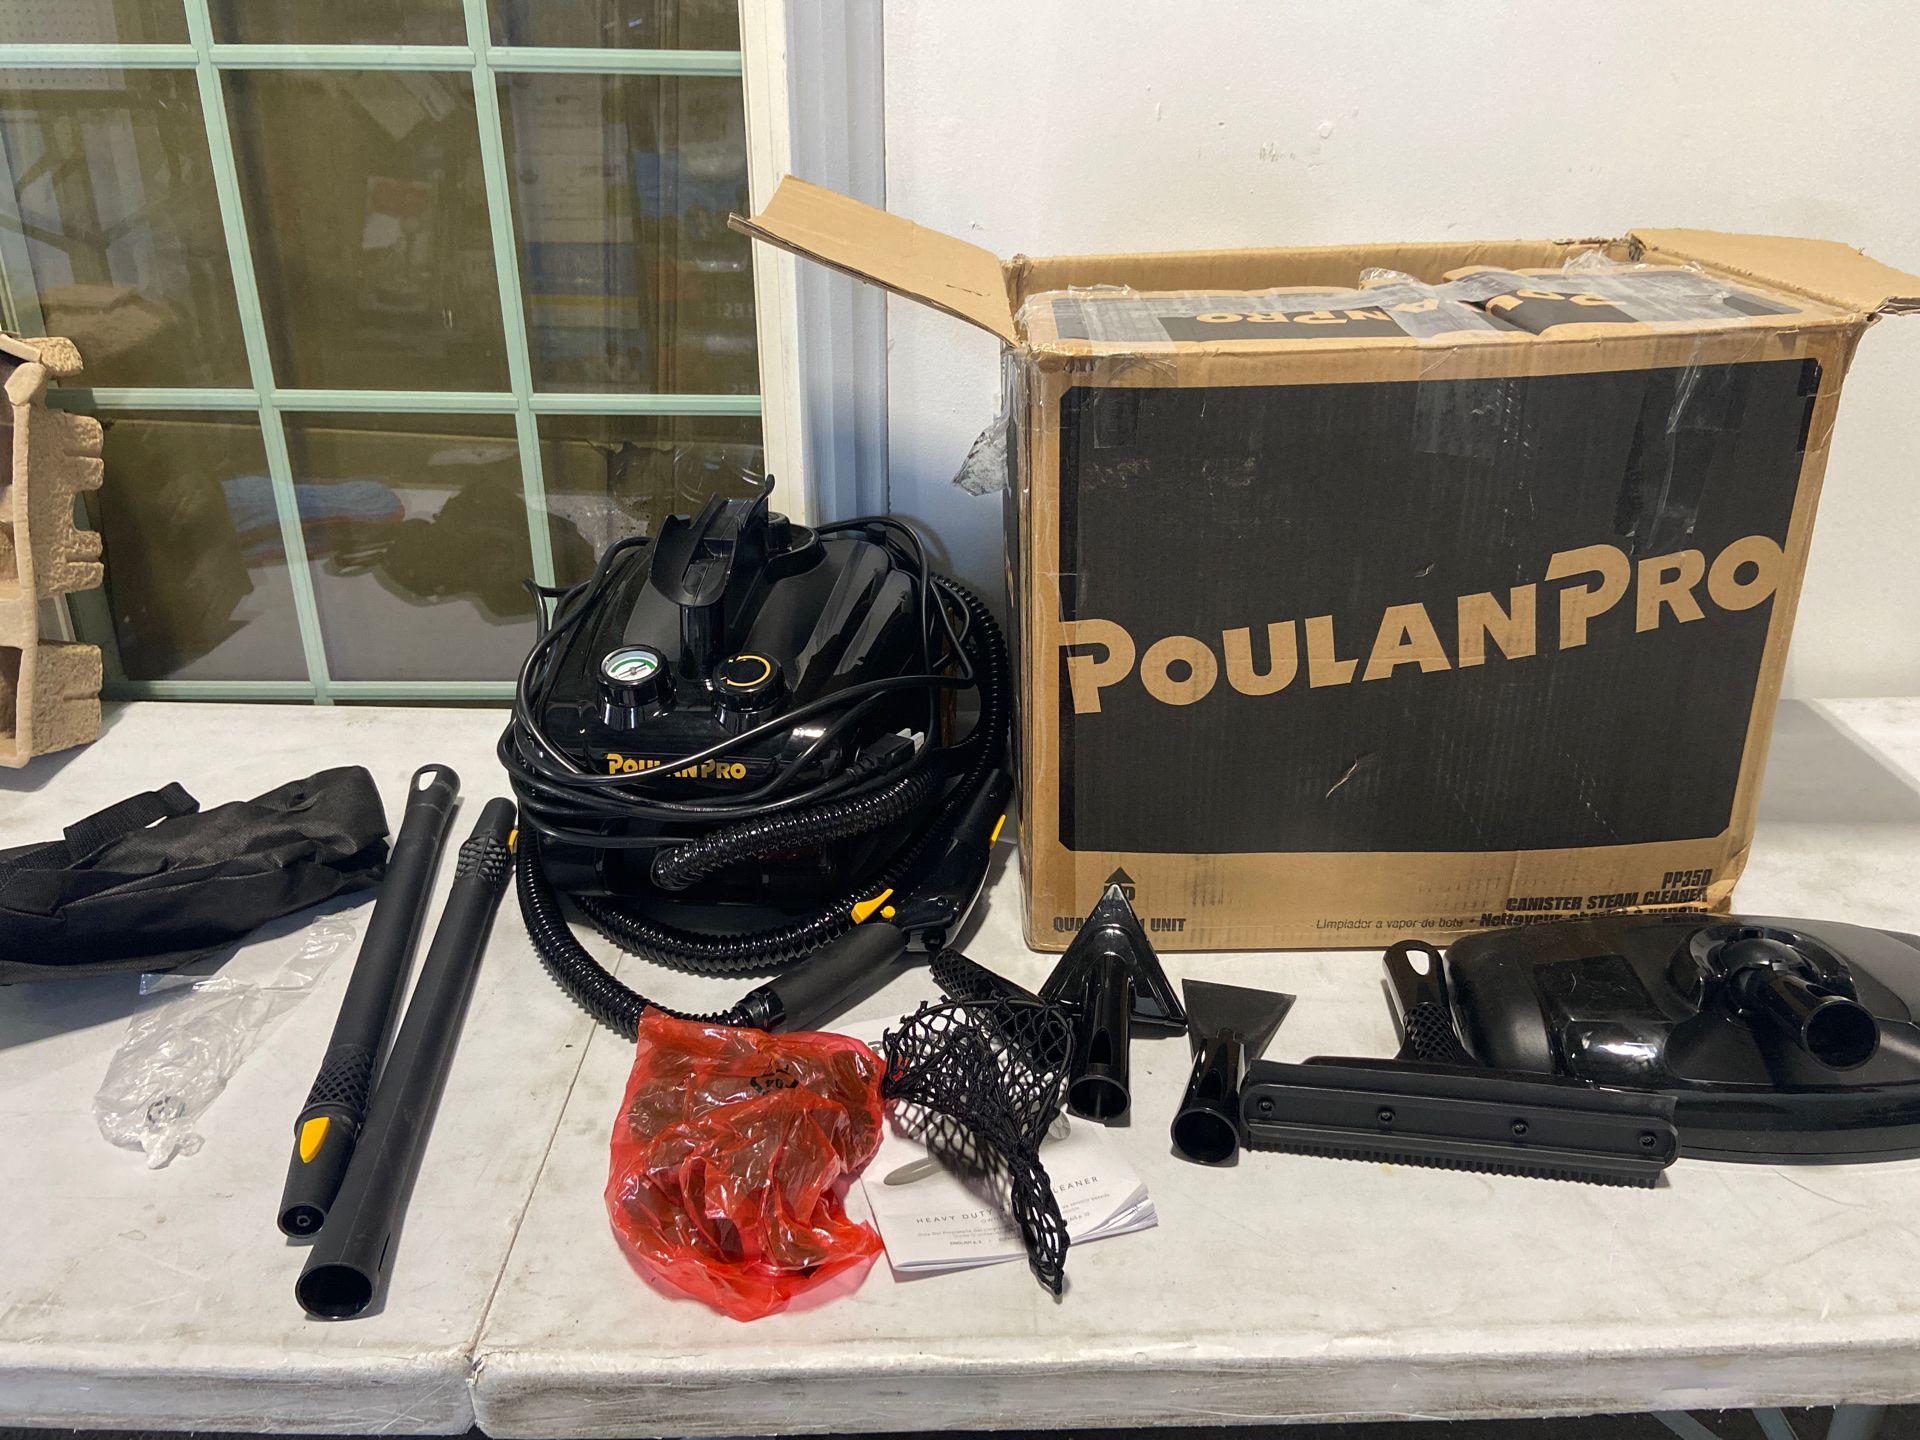 Poulan pro steam cleaner